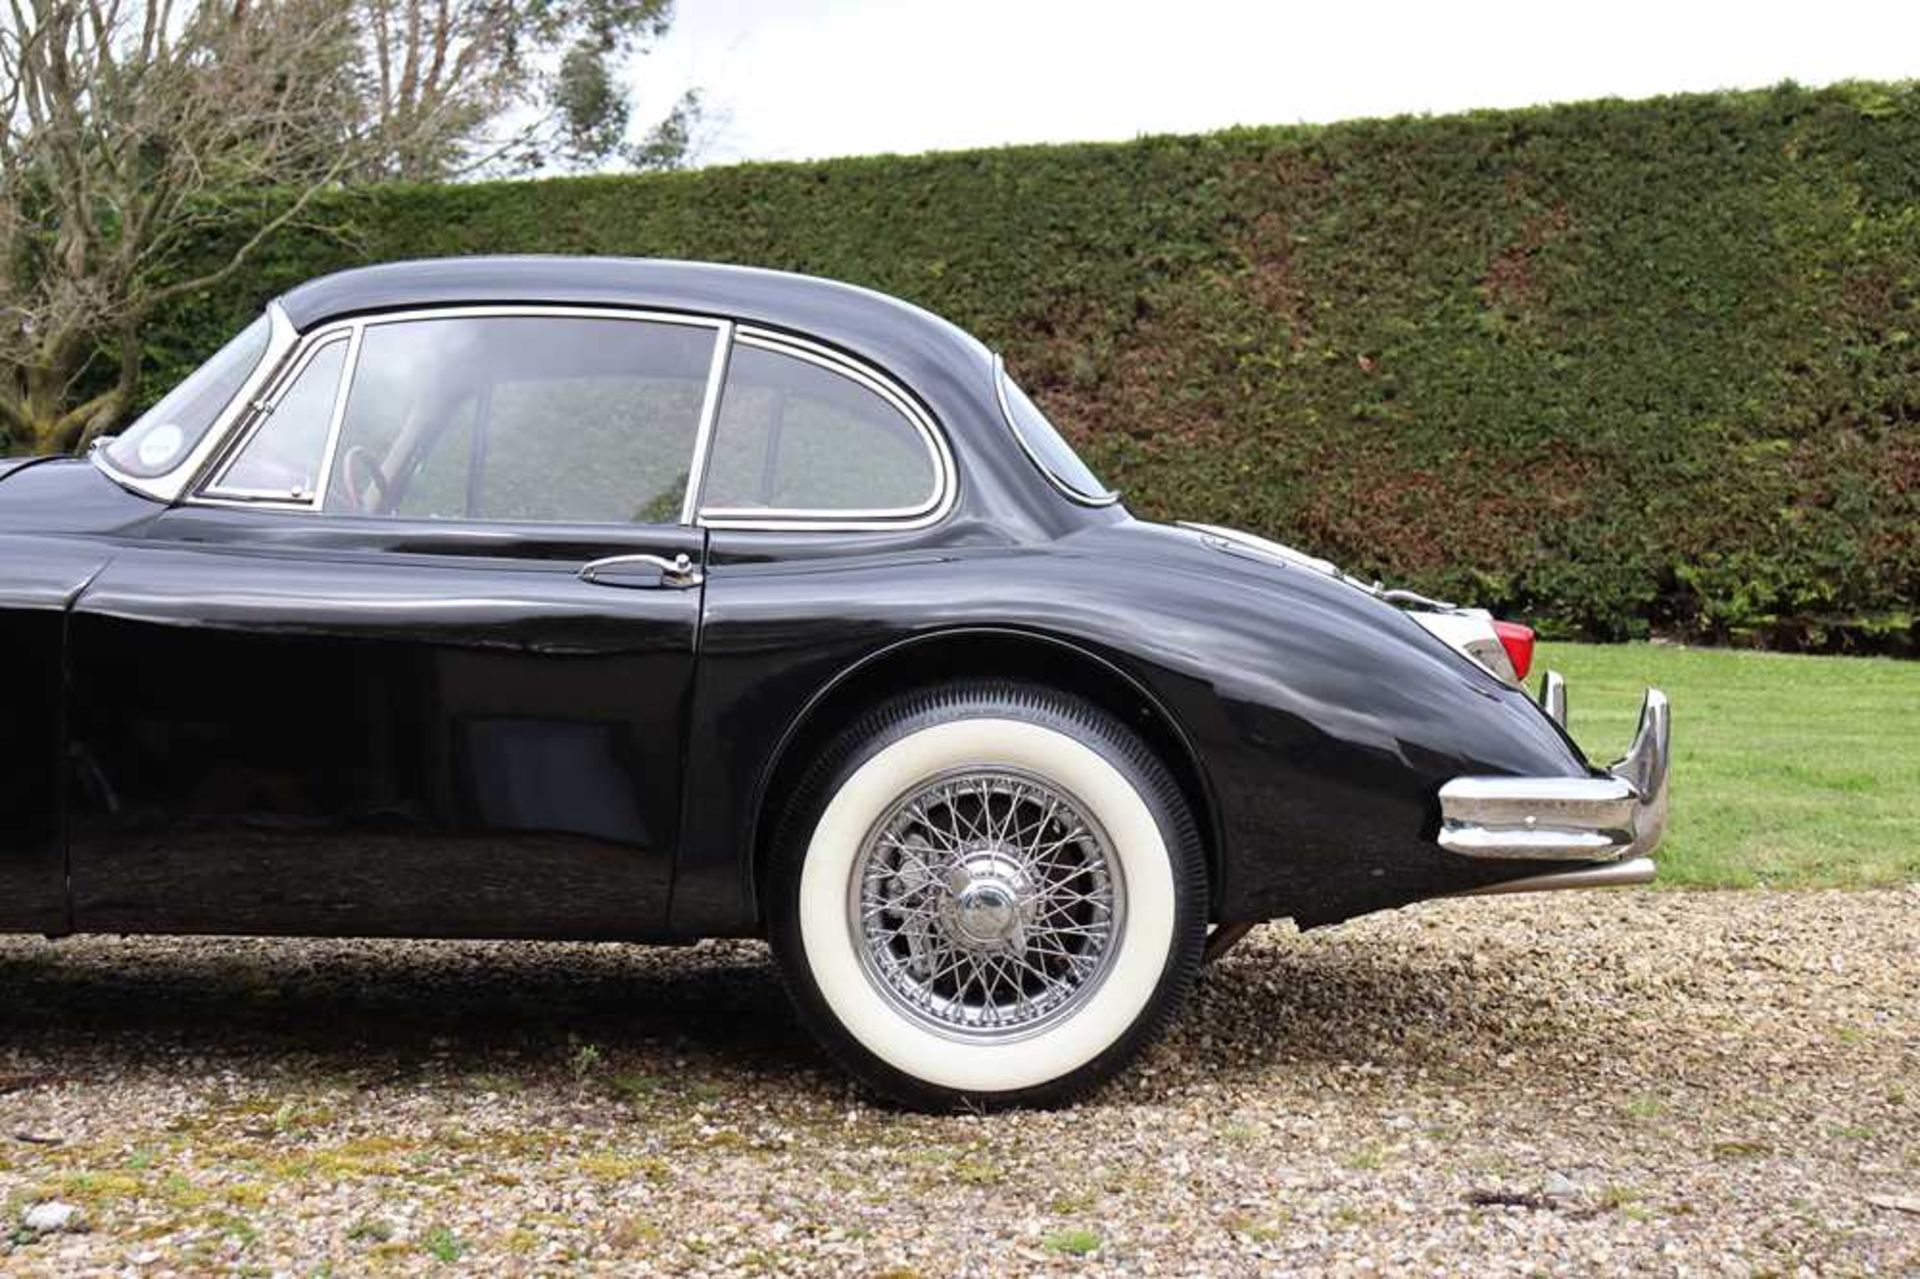 1959 Jaguar XK 150 Fixed Head Coupe 1 of just 1,368 RHD examples made - Image 42 of 49